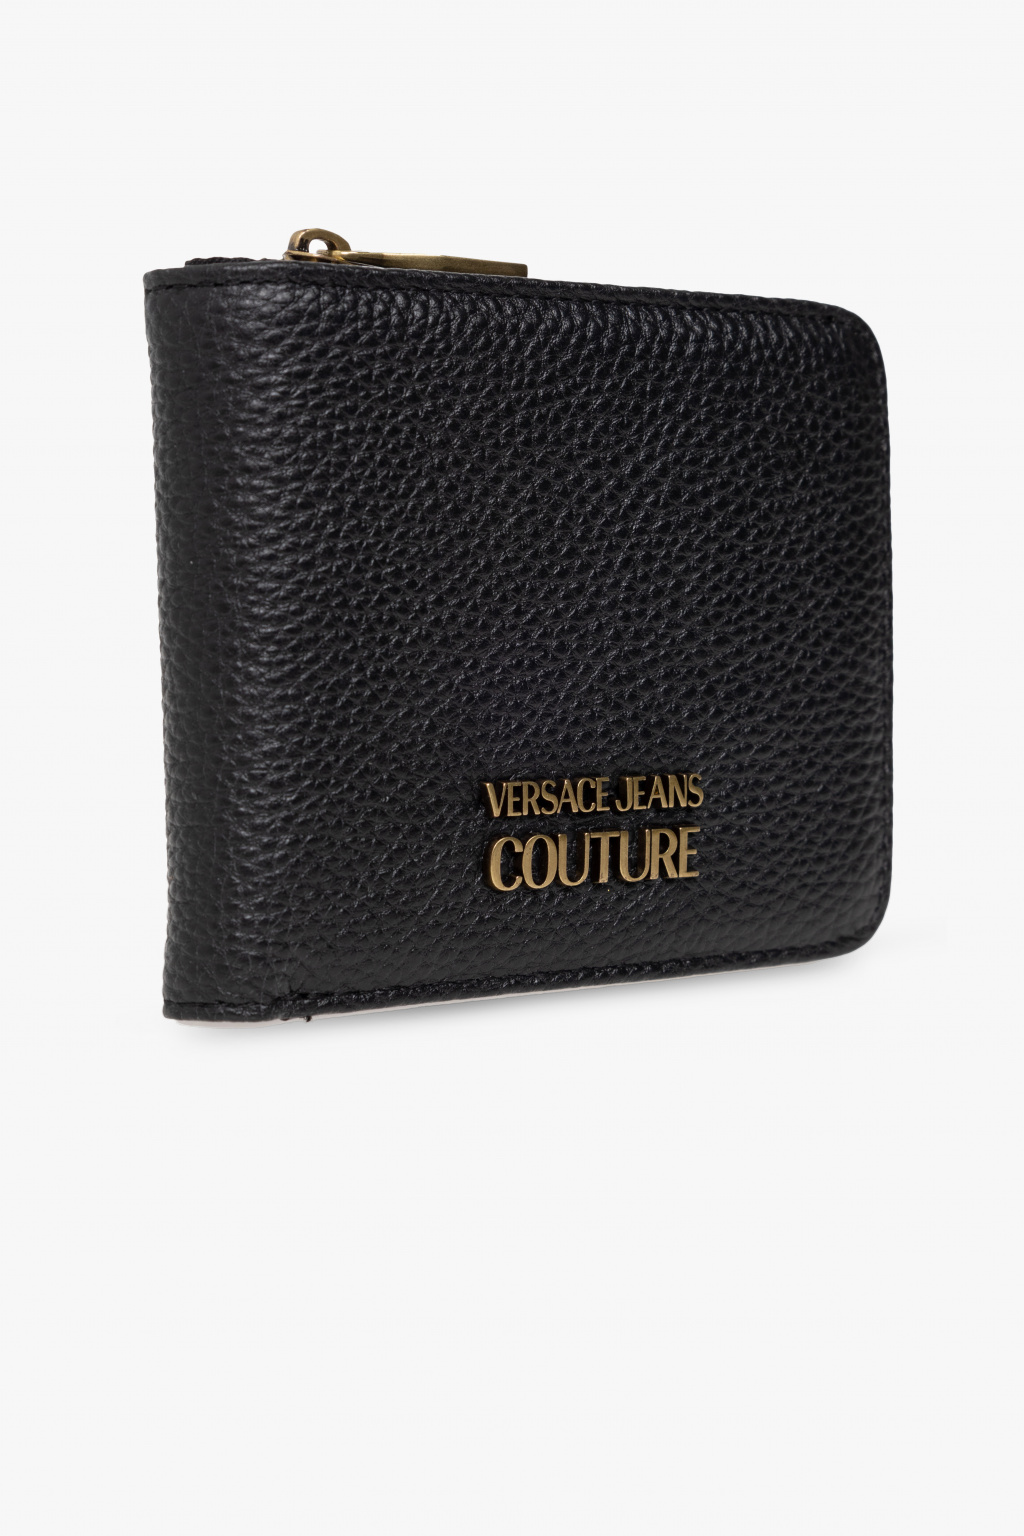 Versace Jeans Couture Leather wallet with logo | Men's Accessories | Vitkac